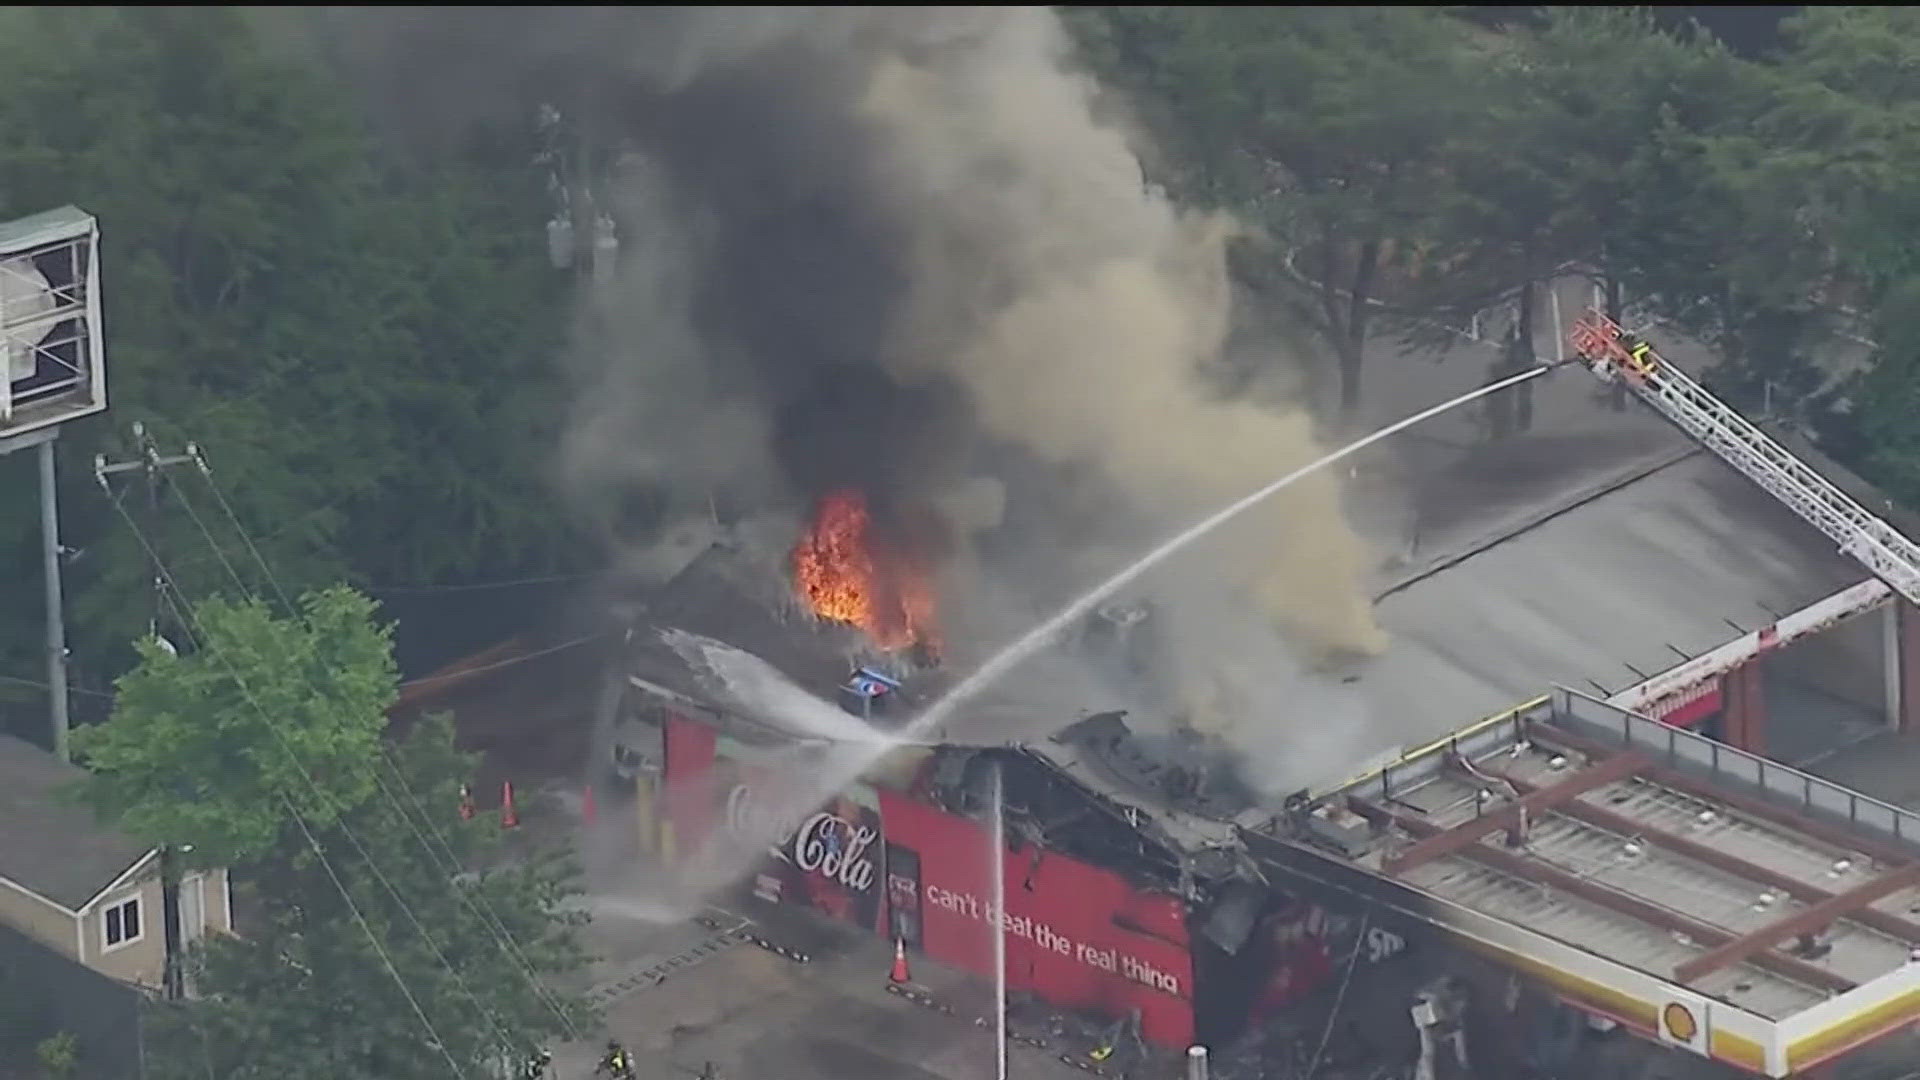 11Alive SkyTracker flew over a Shell gas station along Northside Drive, where heavy smoke was seen as firefighters worked to extinguish the flames.